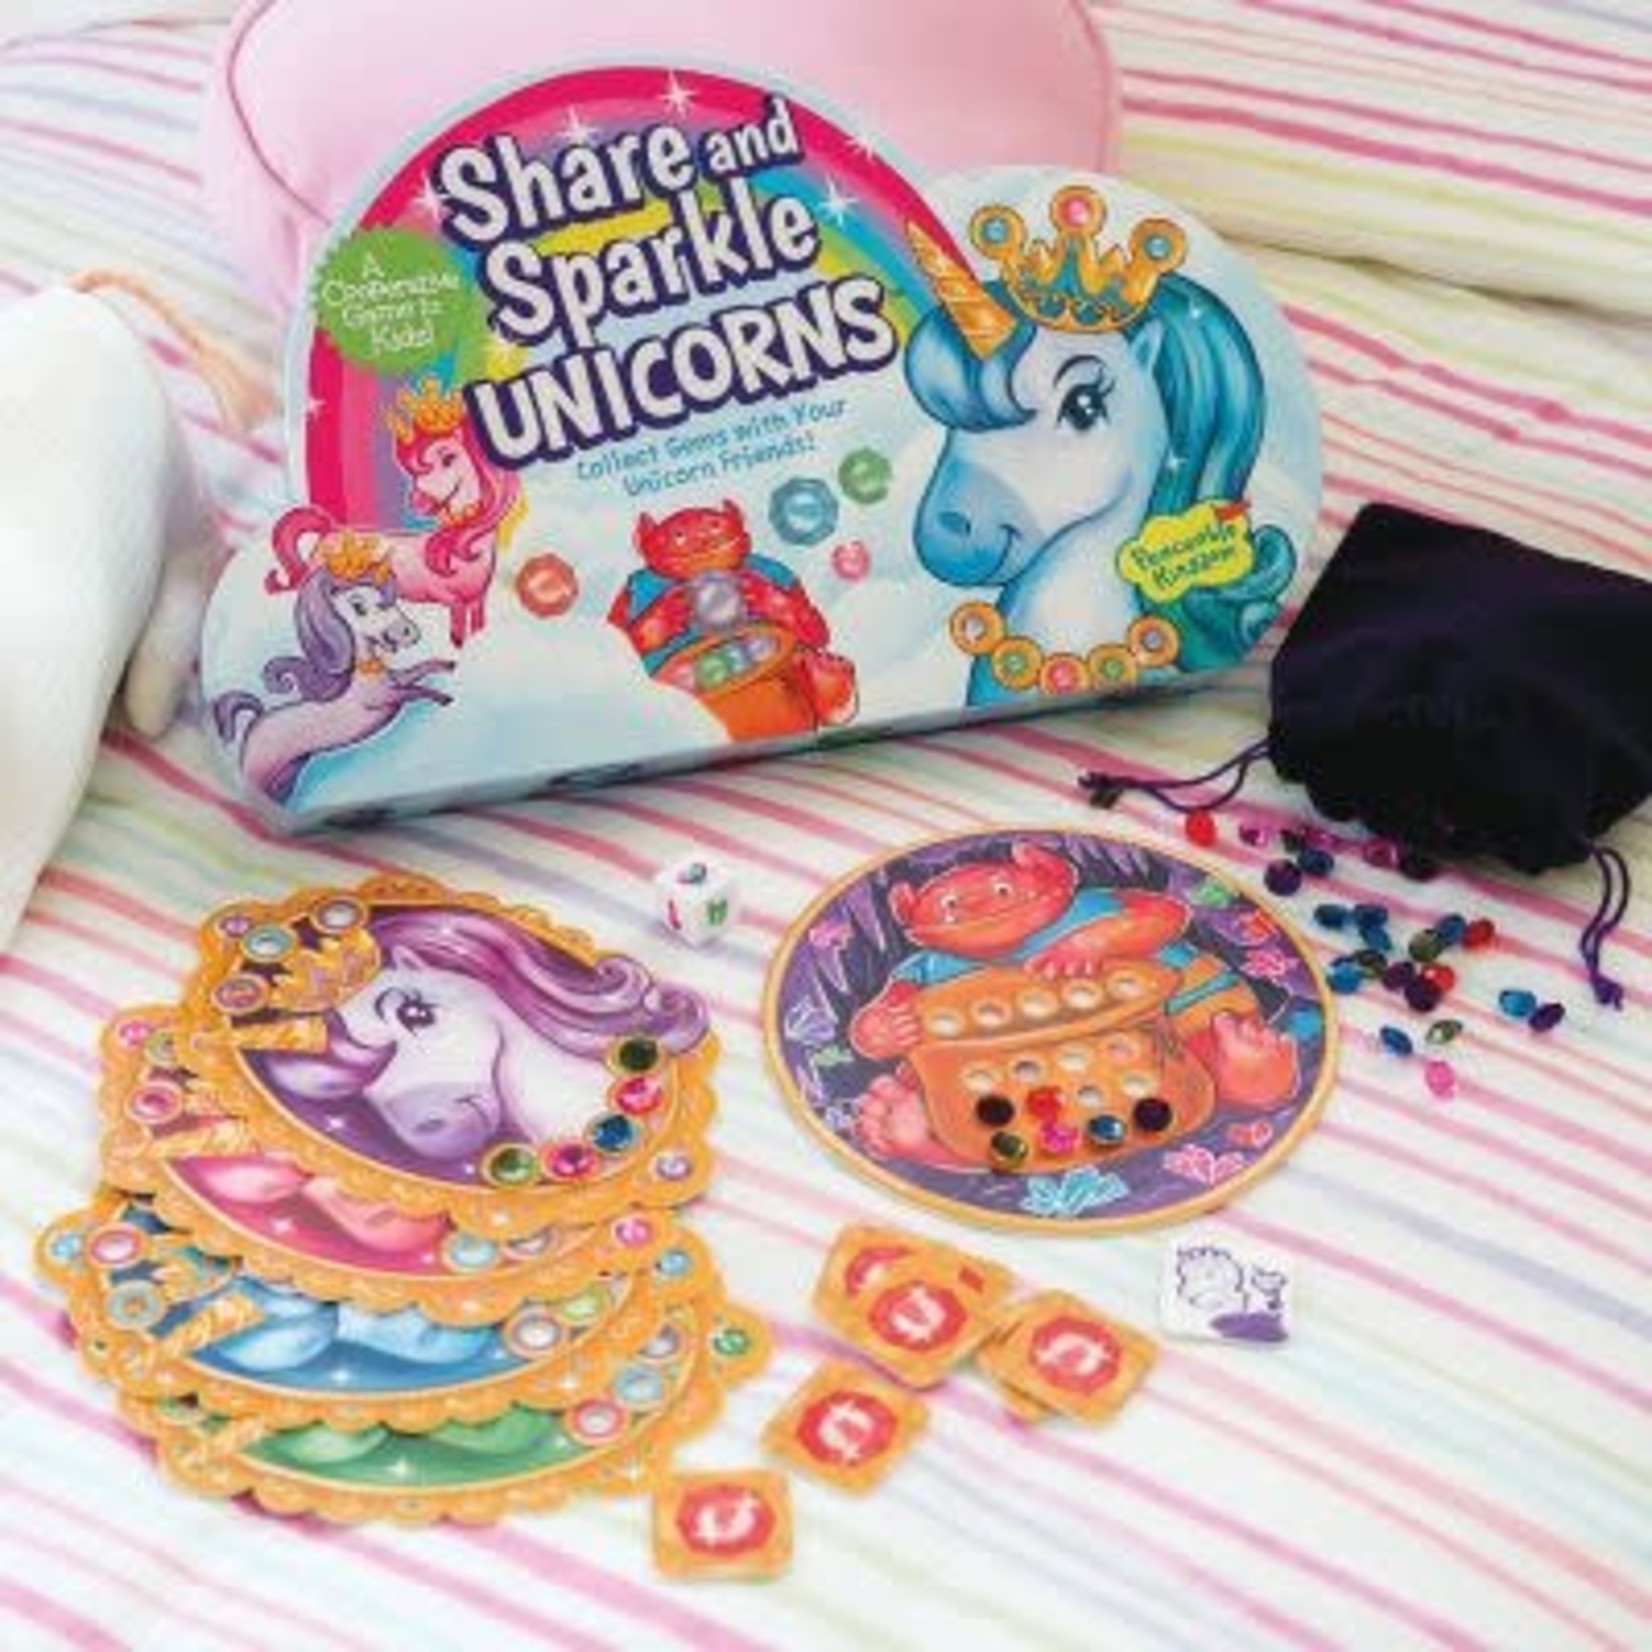 Peaceable Kingdom Share and Sparkle Unicorns: Collect Gems with Your Unicorn Friends